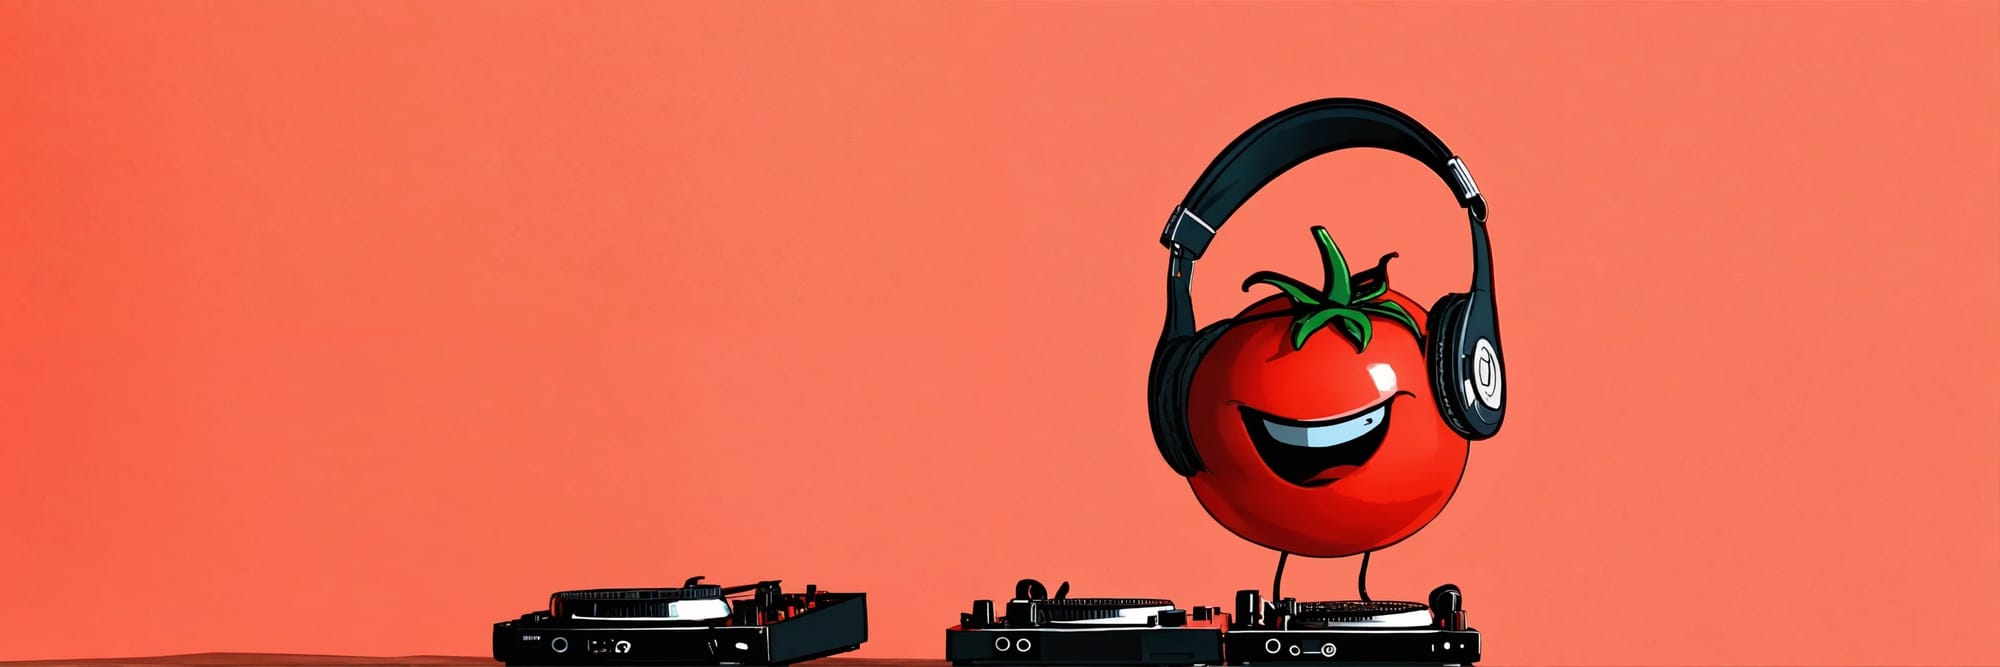 Wu-Tang for my Tomatoes